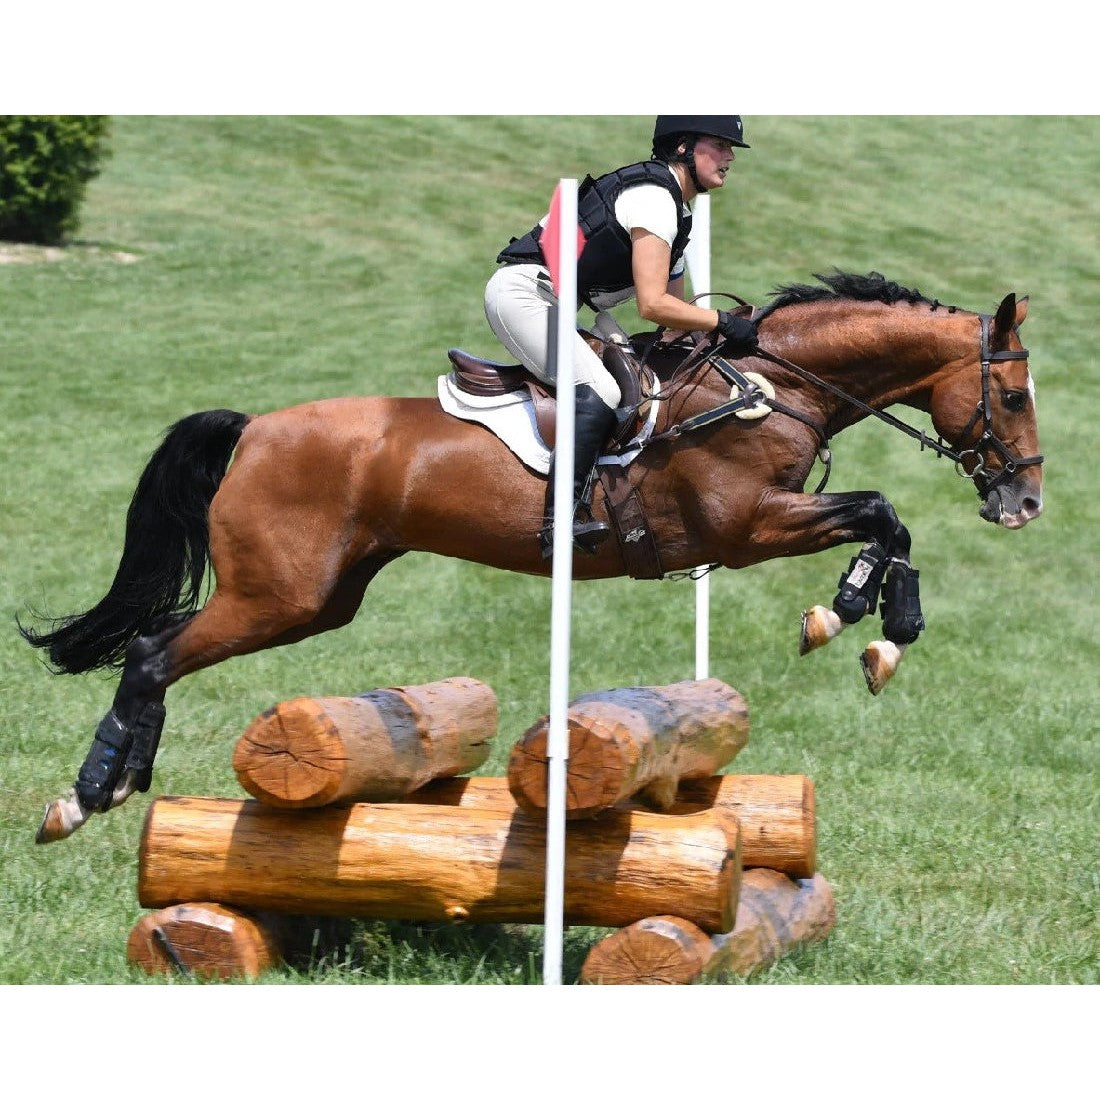 Alt: Equestrian jumping over obstacle, evoking Breyer Horse Toys action.